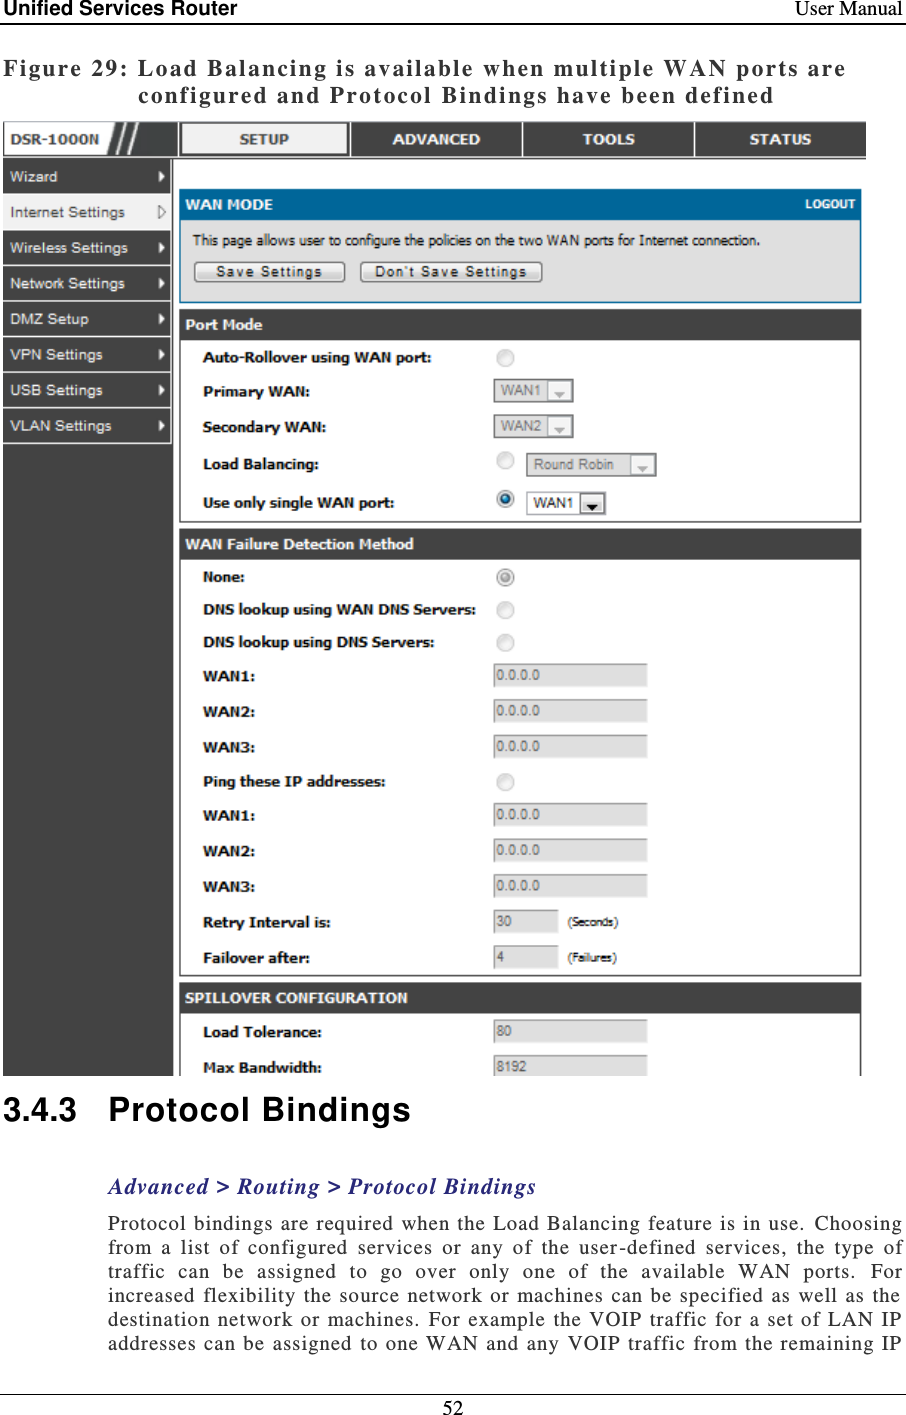 Unified Services Router    User Manual 52  Figure 29: Load Bal ancing is available  when multiple WAN ports are configured and Pro tocol  Bindings have been defined   3.4.3  Protocol Bindings Advanced &gt; Routing &gt; Protocol Bindings Protocol  bindings are required  when the Load Balancing  feature is in use.  Choosing from  a  list  of  configured  services  or  any  of  the  user -defined  services,  the  type  of traffic  can  be  assigned  to  go  over  only  one  of  the  available  WAN  ports.   For increased  flexibility the source  network or  machines  can be  specified  as  well  as the destination network  or machines. For example  the  VOIP  traffic  for  a  set of  LAN  IP addresses can be assigned to one WAN and any  VOIP traffic  from the remaining IP 